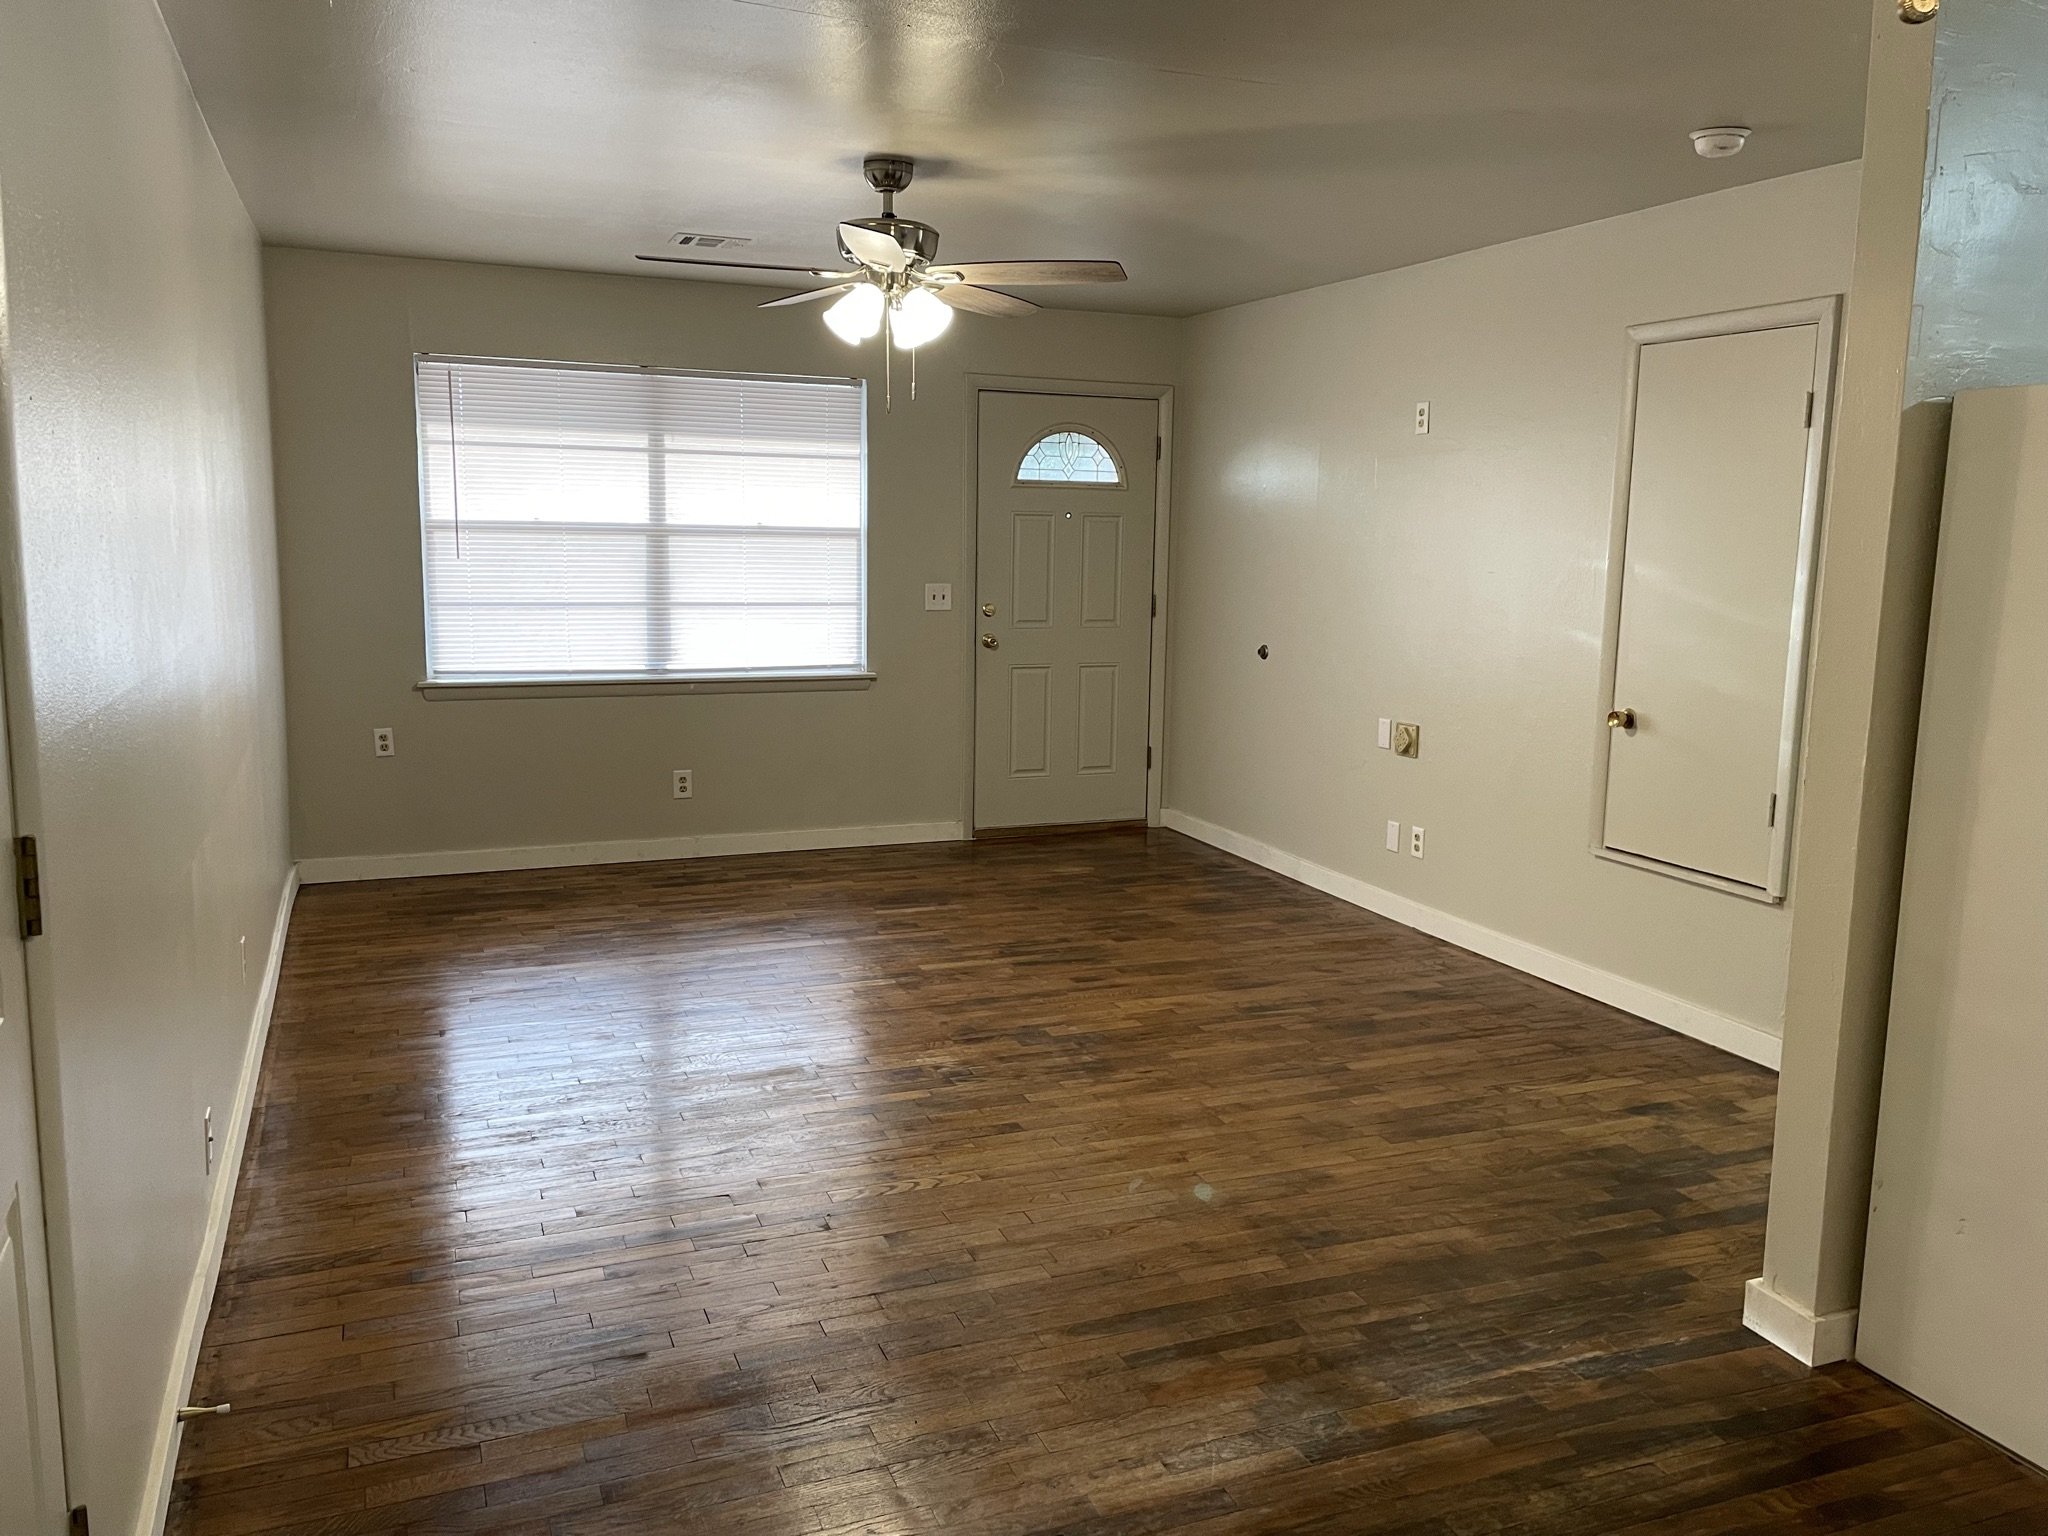  Refinished hardwood floors throughout home 